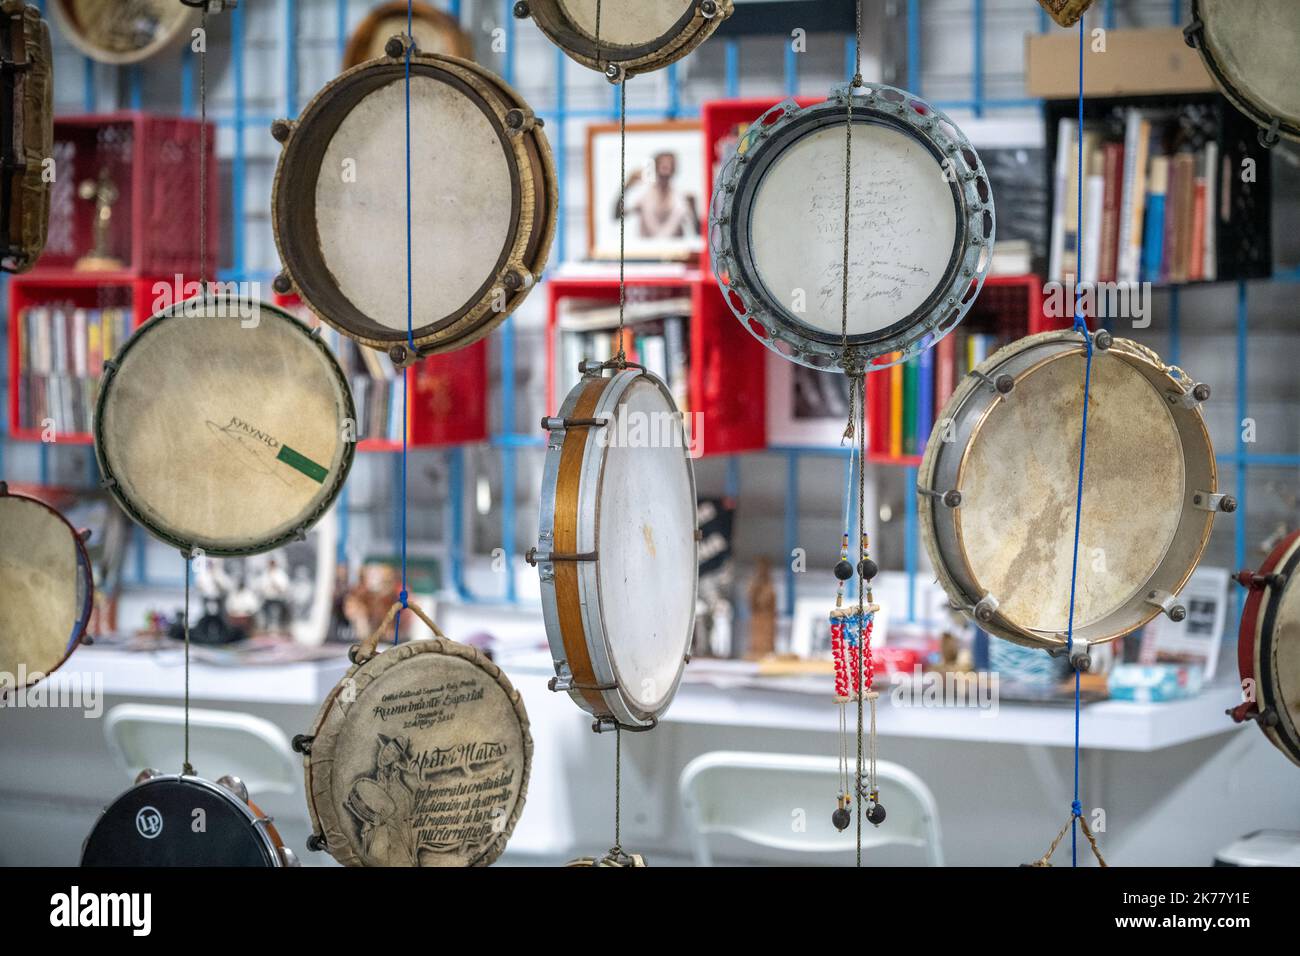 Hand drums for bomba and plena on display at Museum Stock Photo